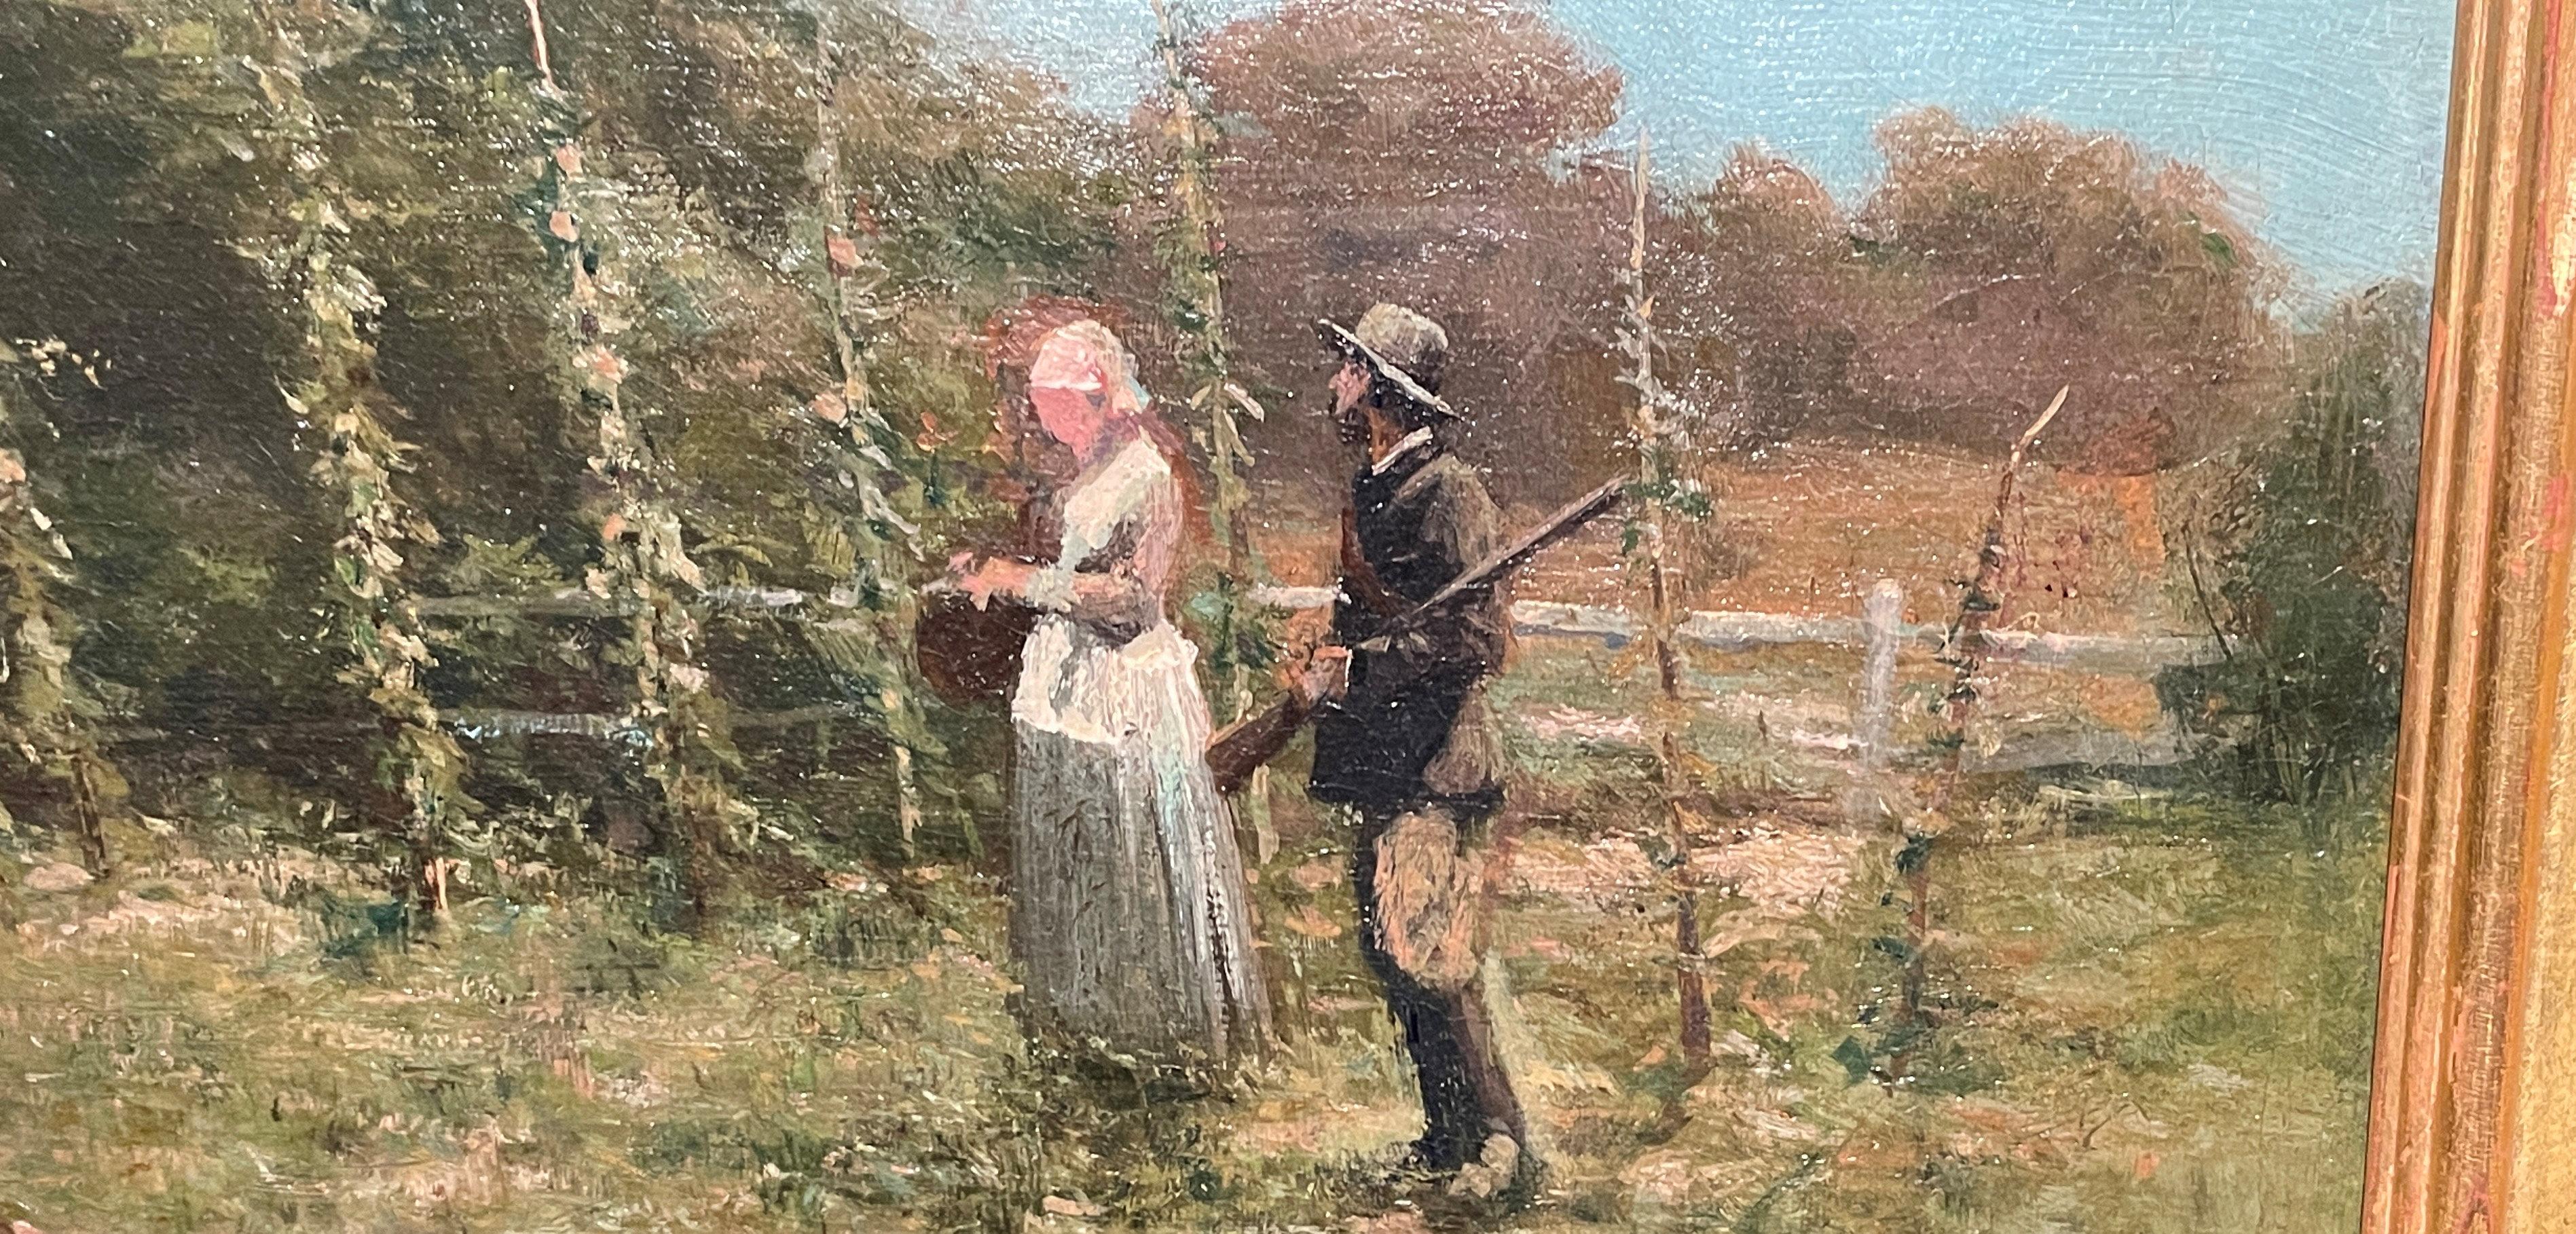 James Brade Sword (1839 - 1915)
Couple in the Field
Oil on canvas
16 x 20 inches
Signed lower left

After a childhood in Macao, China, James Brade Sword started out in life, after high school in Philadelphia, employed by a civil engineer on various